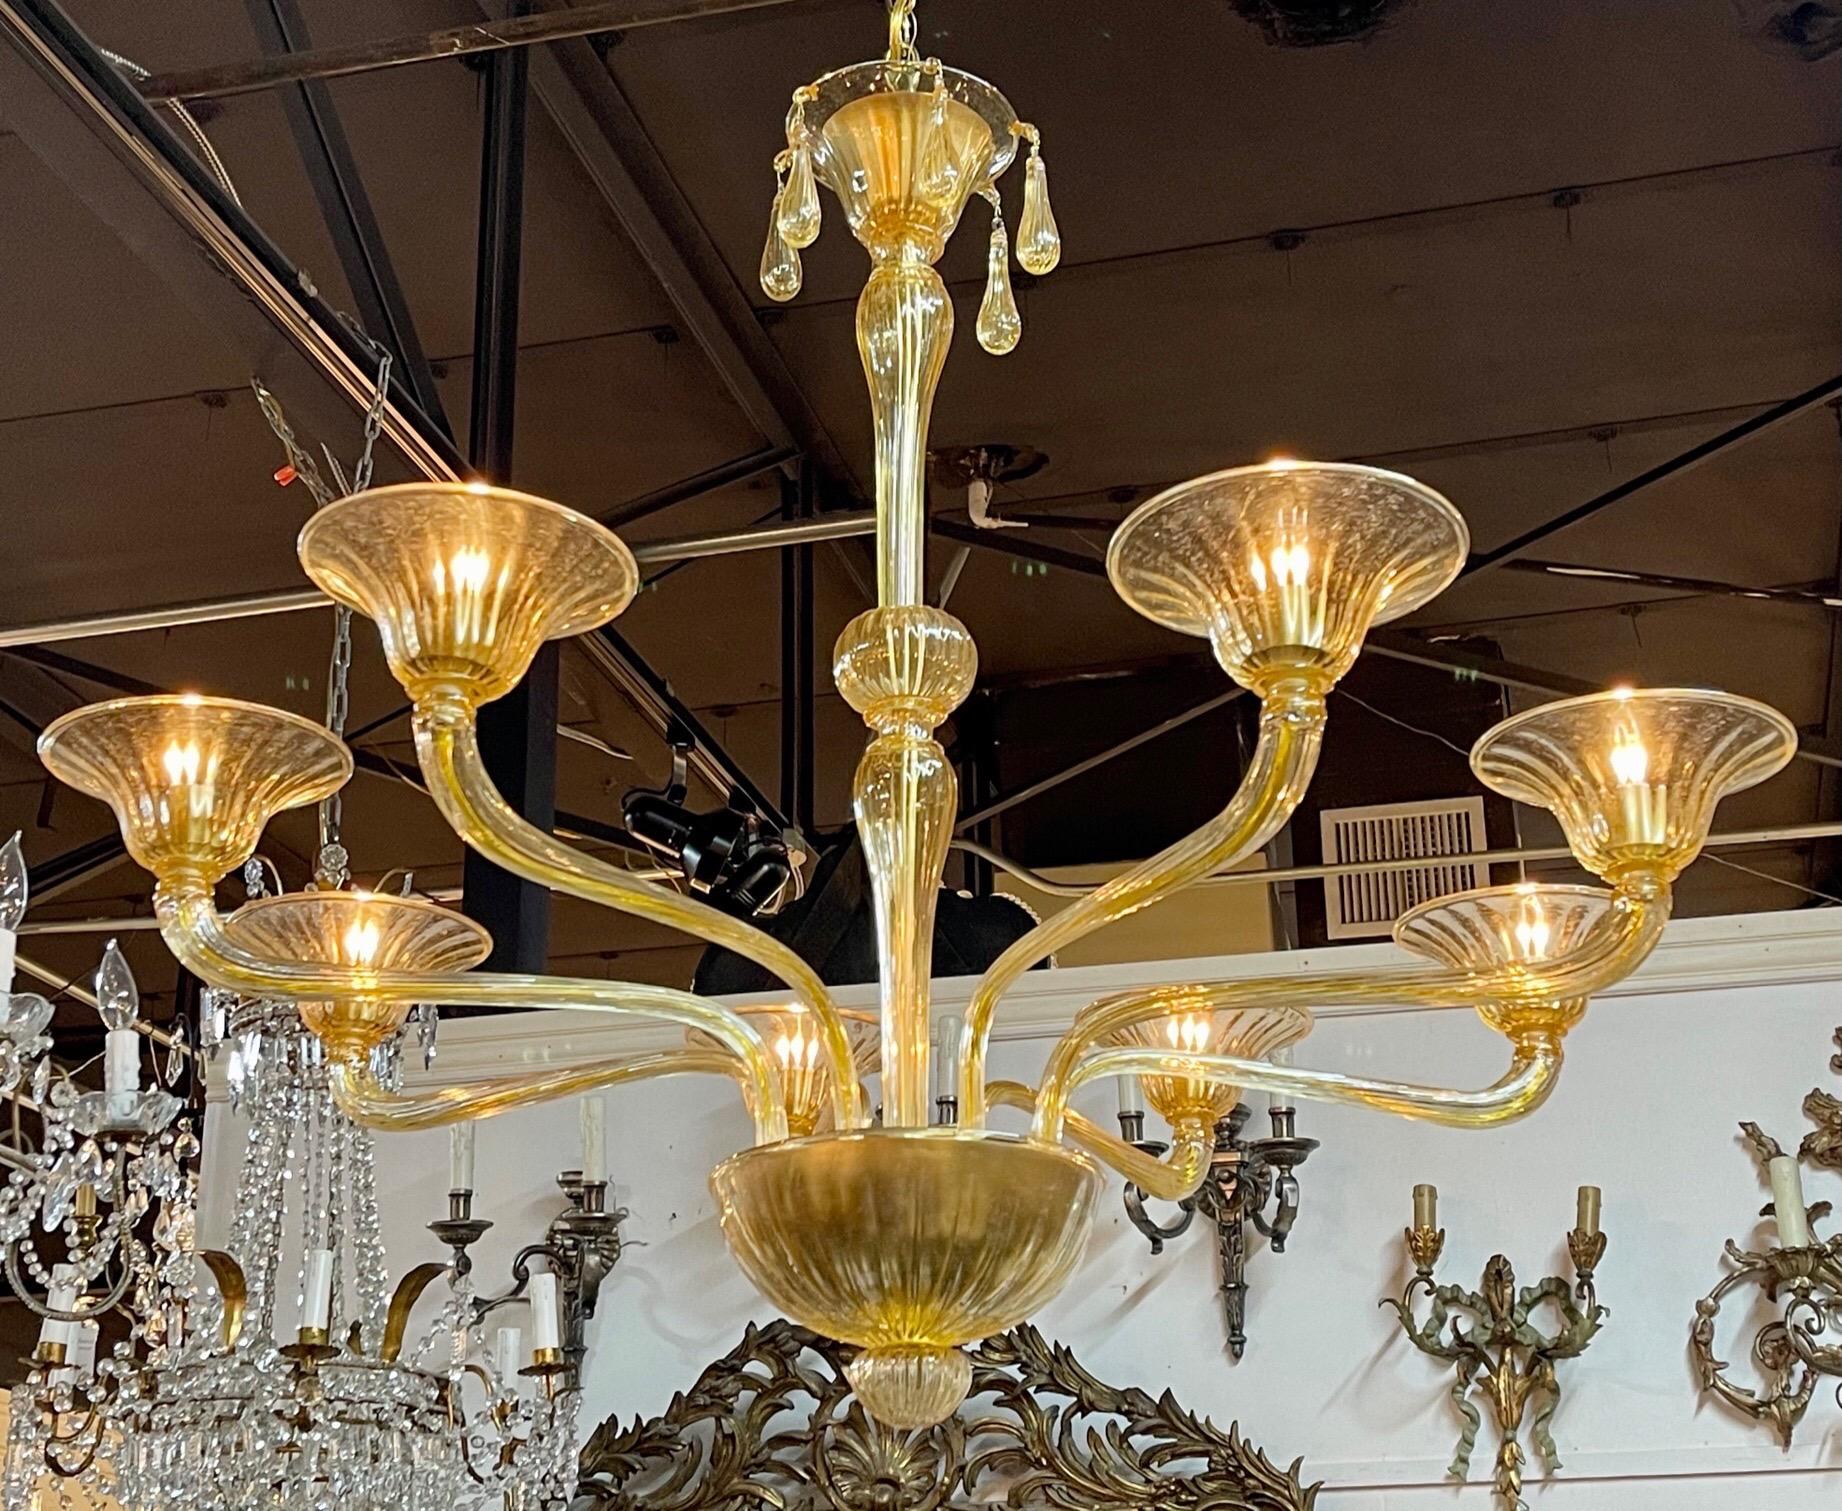 Decorative modern gold Murano glass chandelier with 8 arms. Great for a high end designer look!!